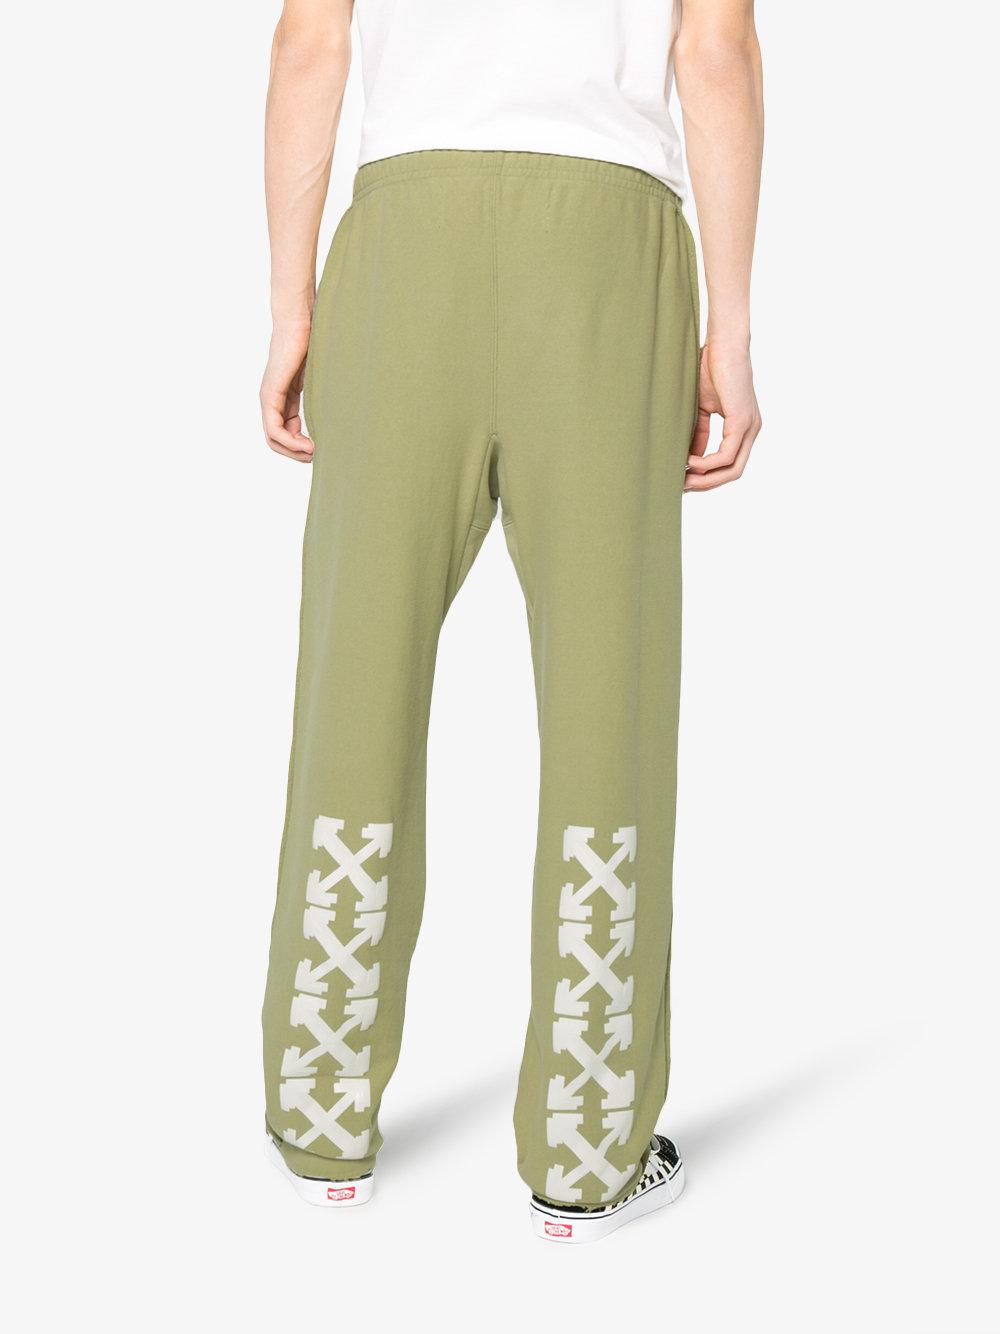 Off-White Virgil Abloh Synthetic X Champion Sweatpants in Green for Men - Lyst